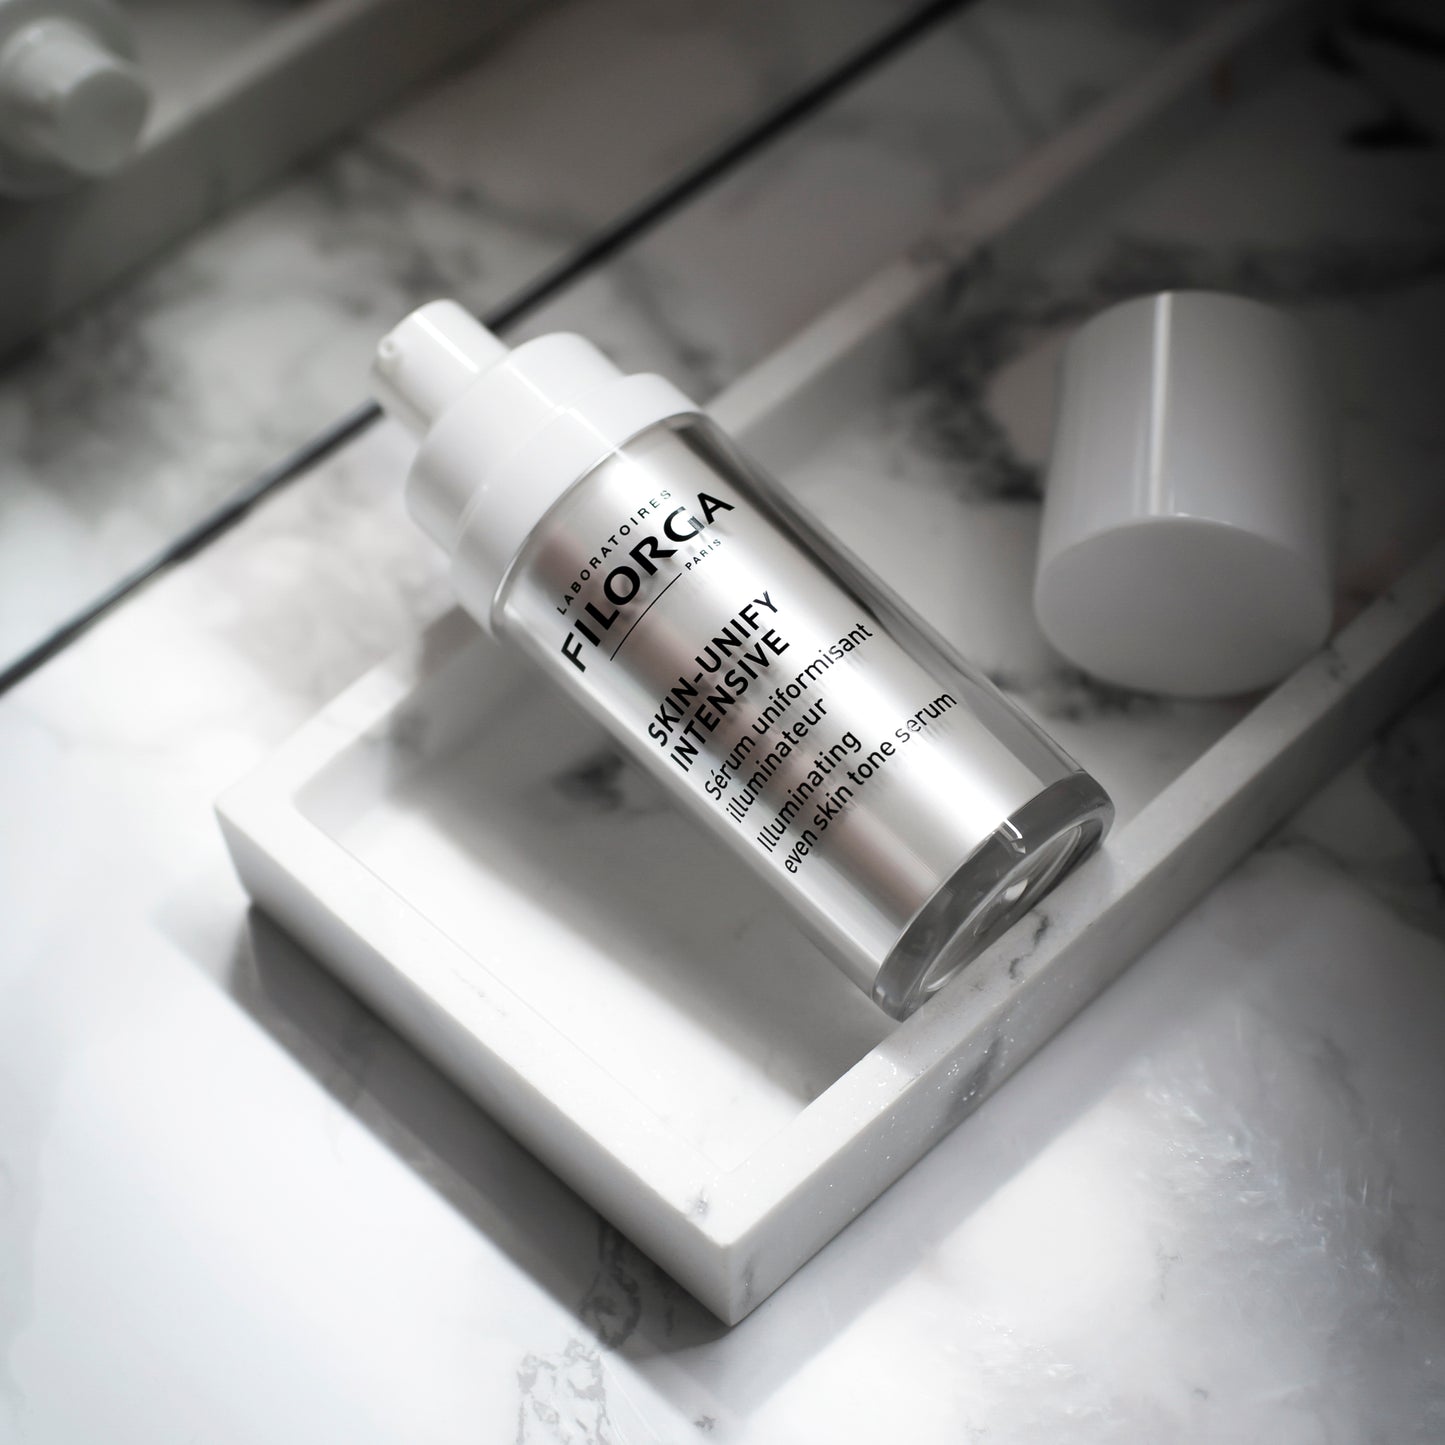 FILORGA SKIN-UNIFY INTENSIVE open bottle on its side on a white marble tray with black veins